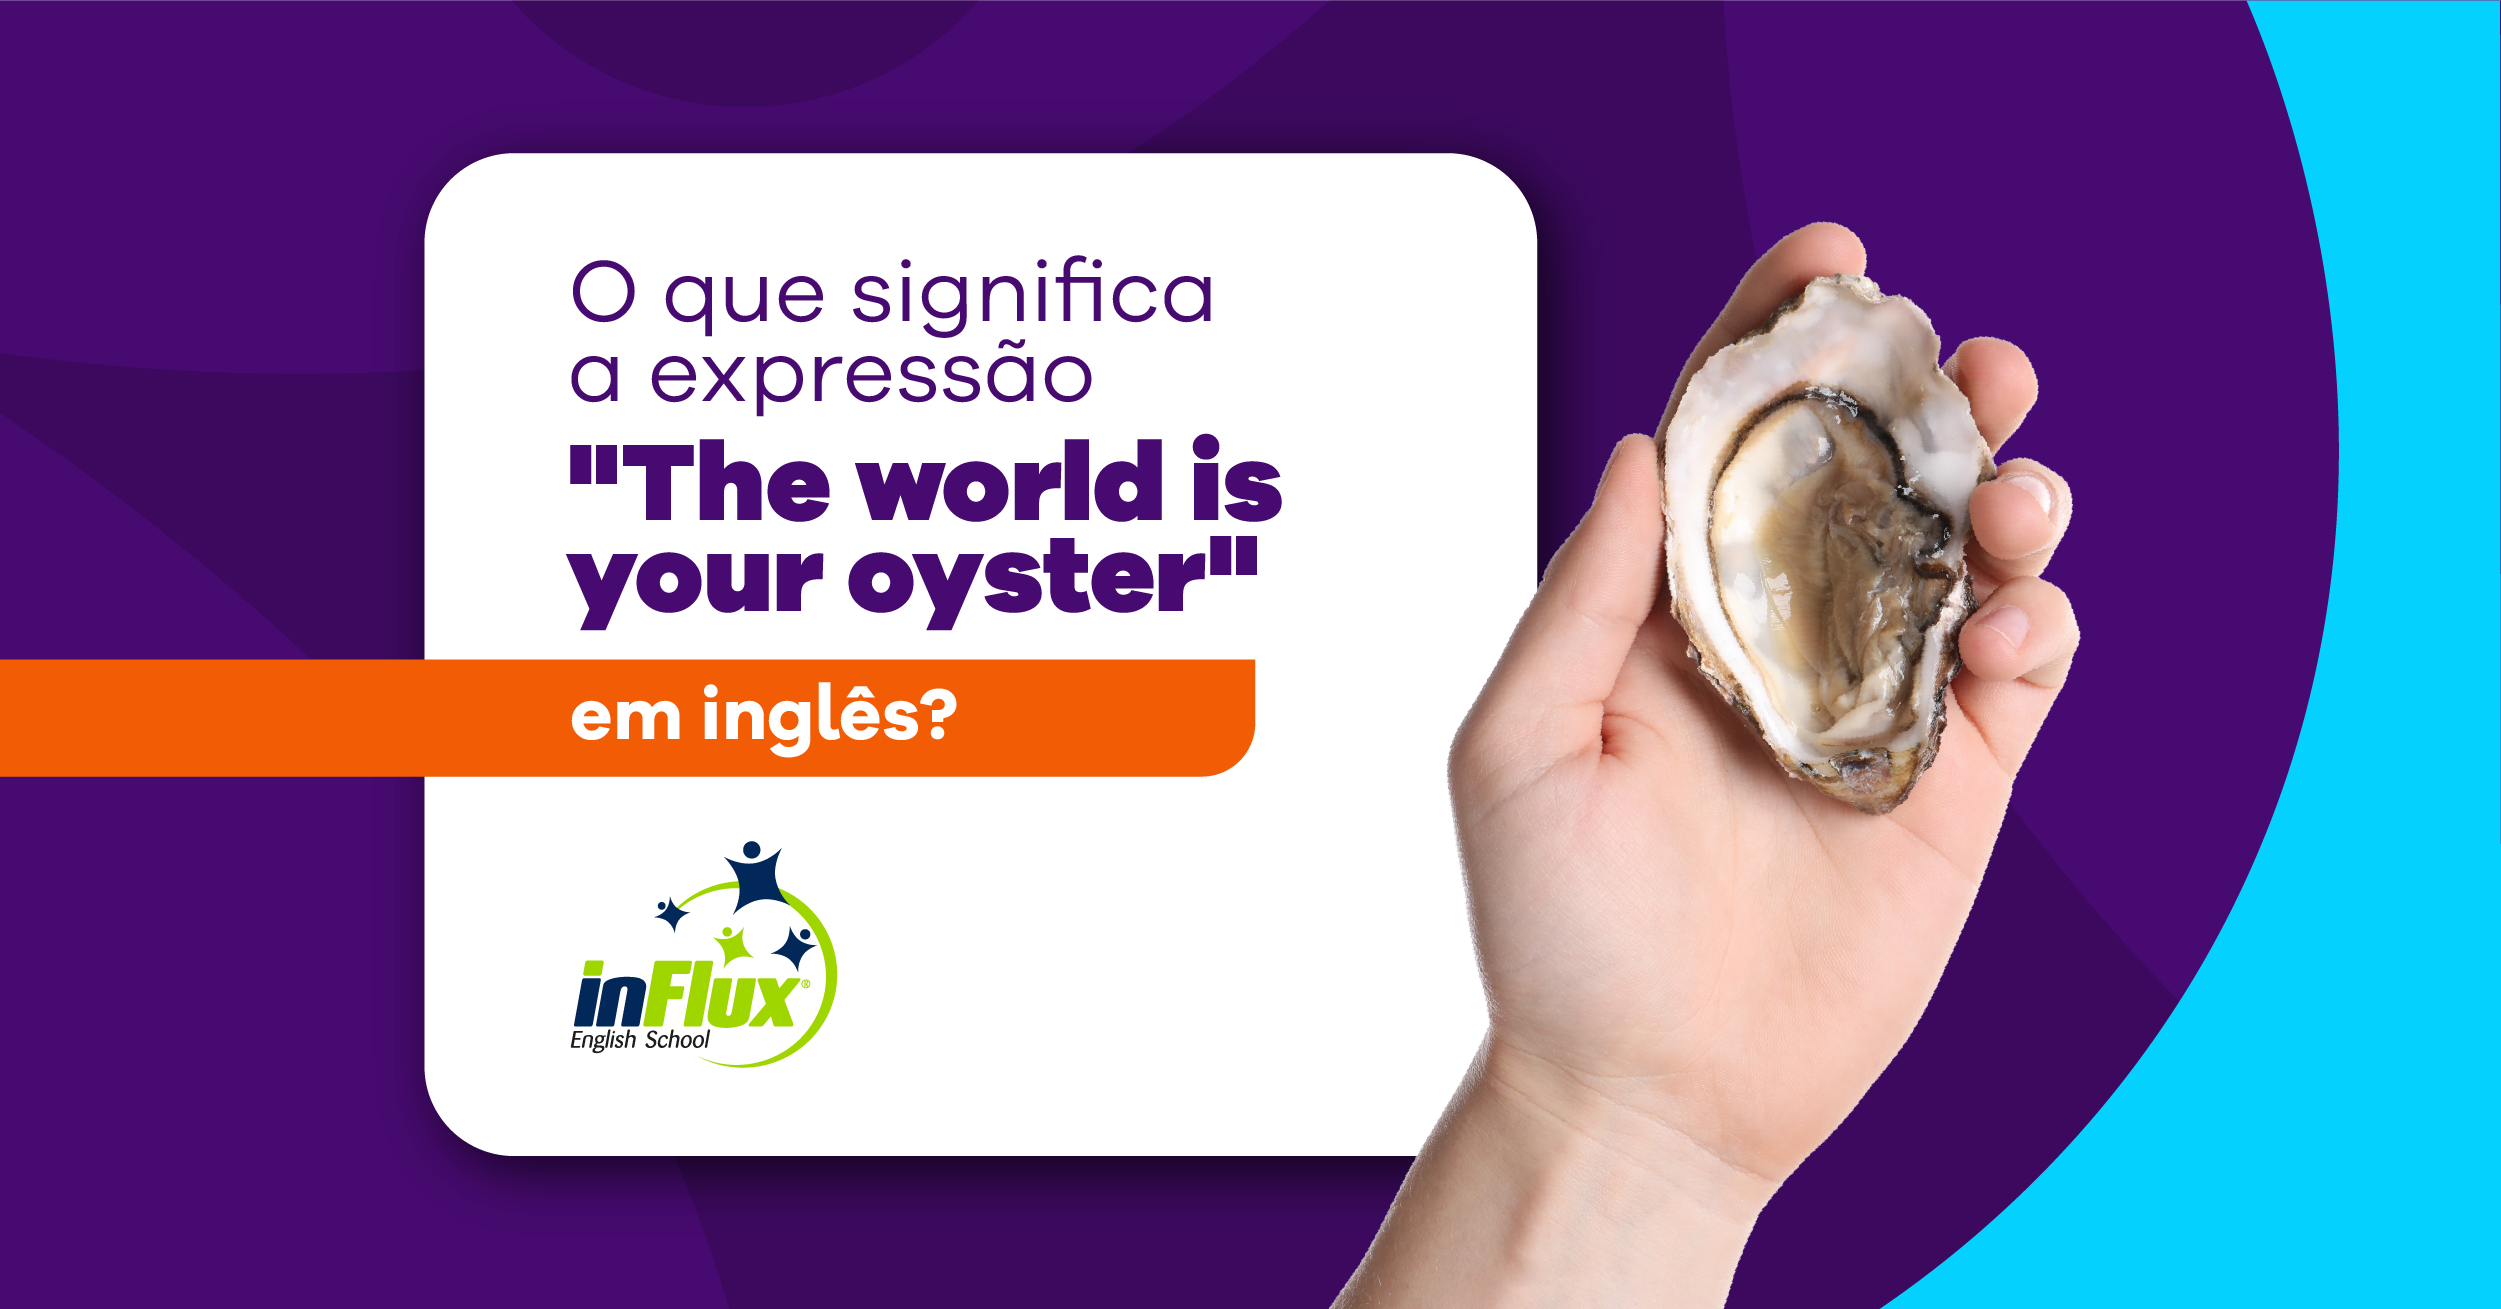 O que significa “the world is your oyster” em inglês?